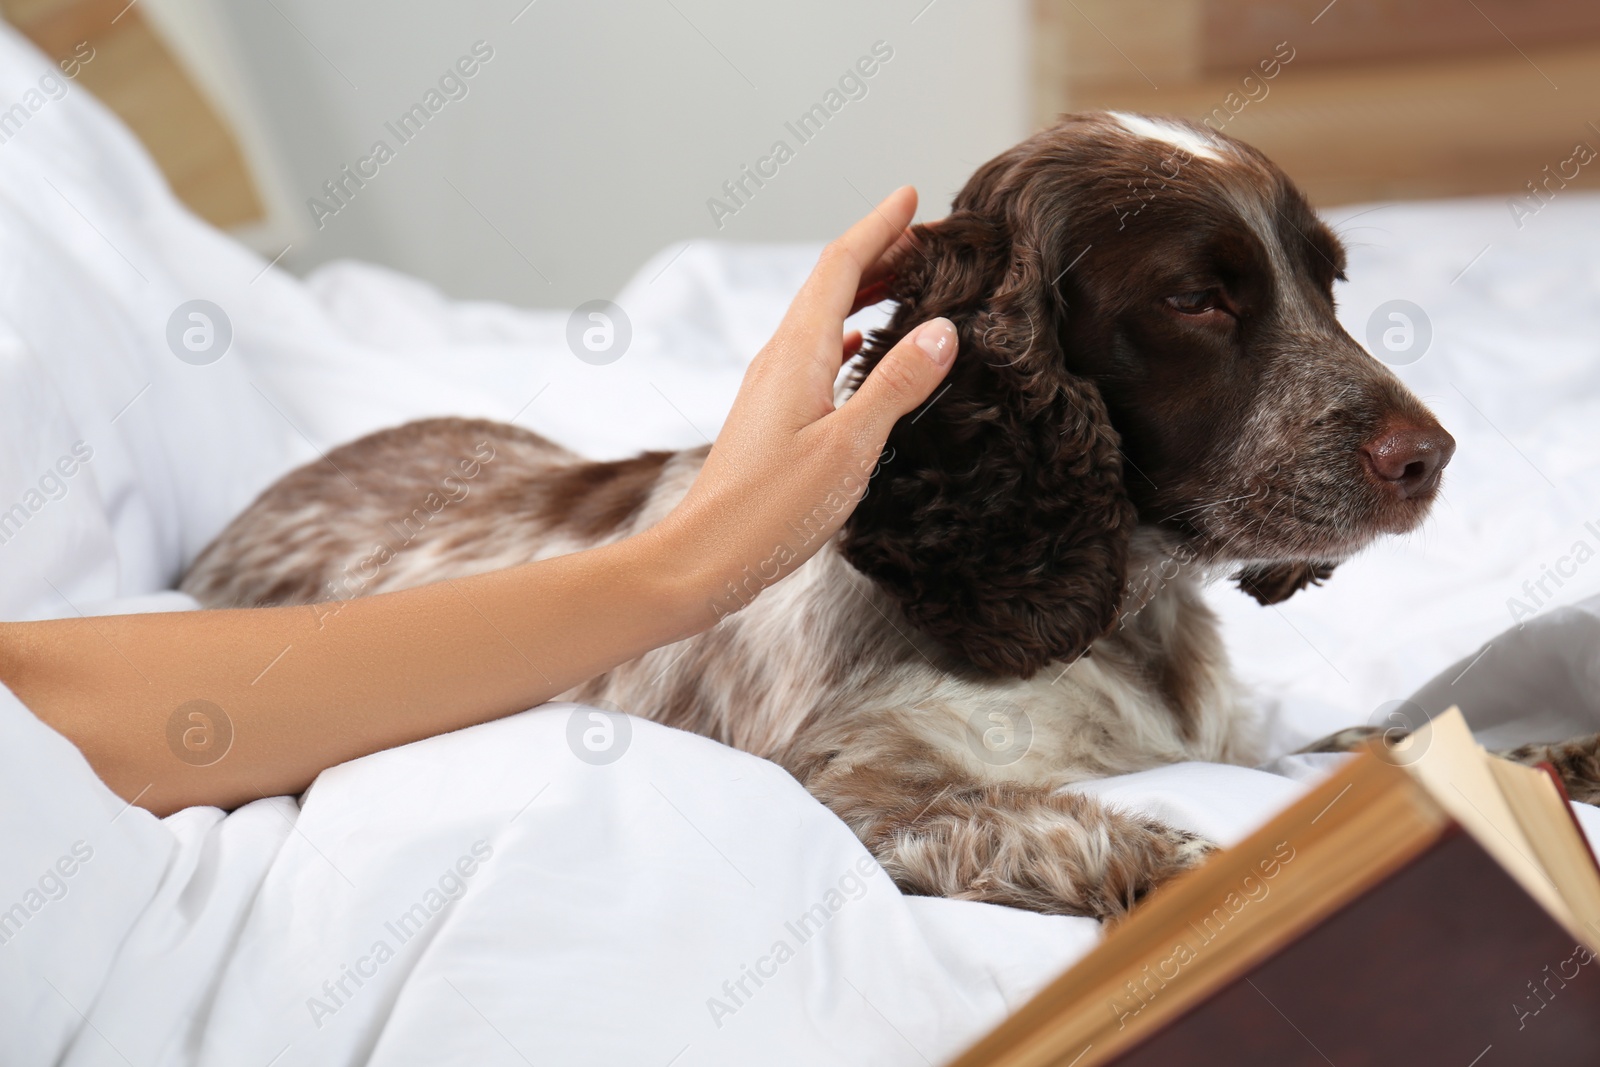 Photo of Adorable Russian Spaniel with owner in bed, closeup view